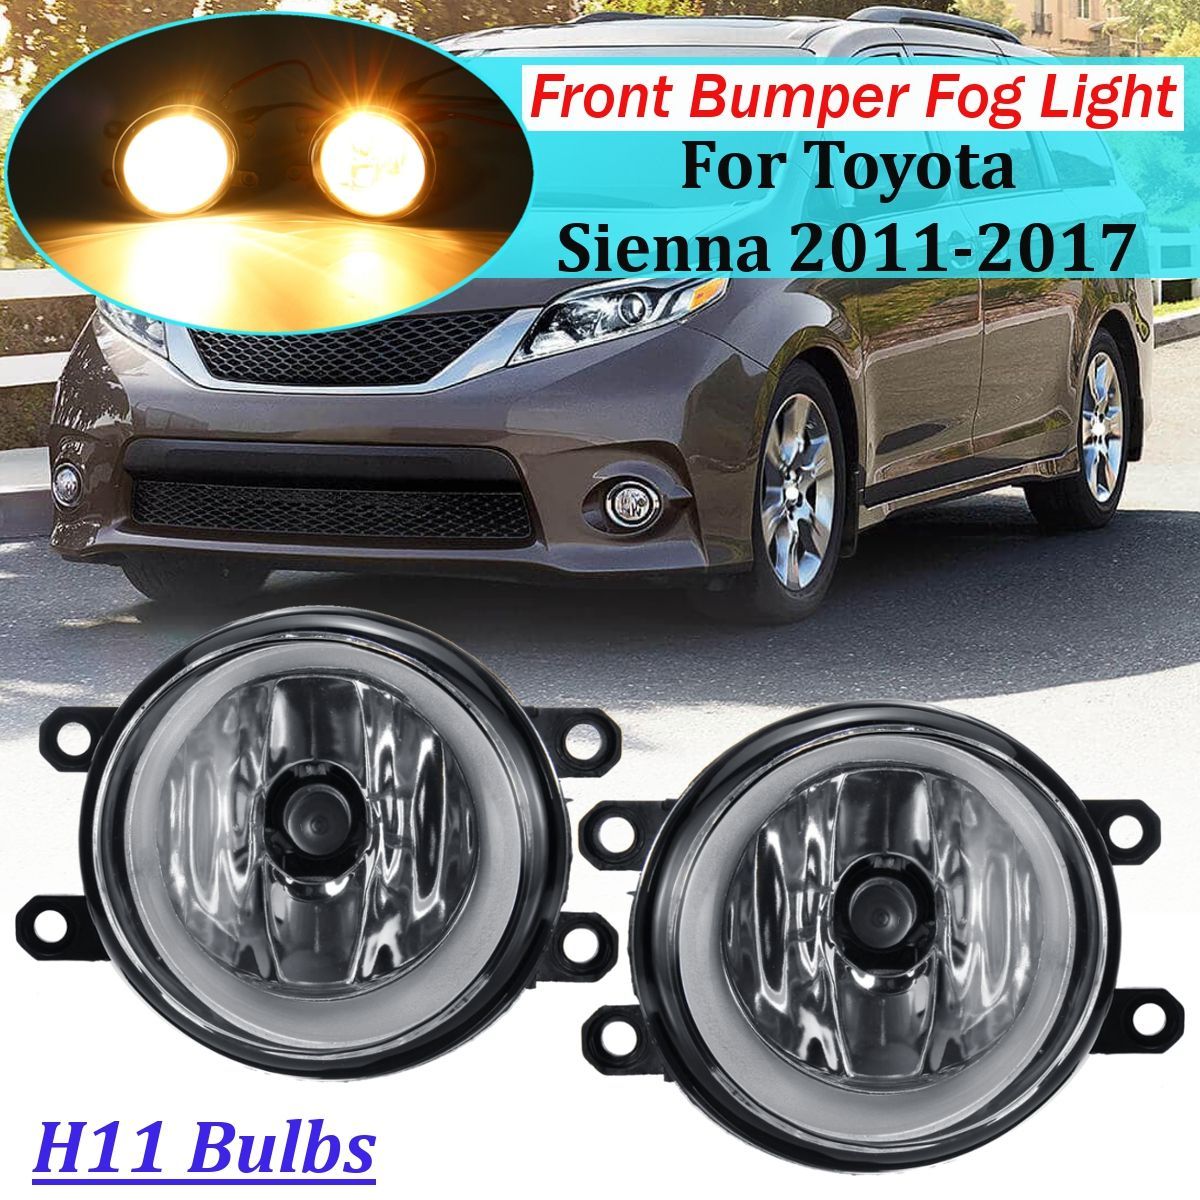 Universal-Front-Bumper-Fog-Light-Lamp-with-H11-Bulb-For-Toyota-Sienna-Camry-Corolla-Highlander-Prius-1730165